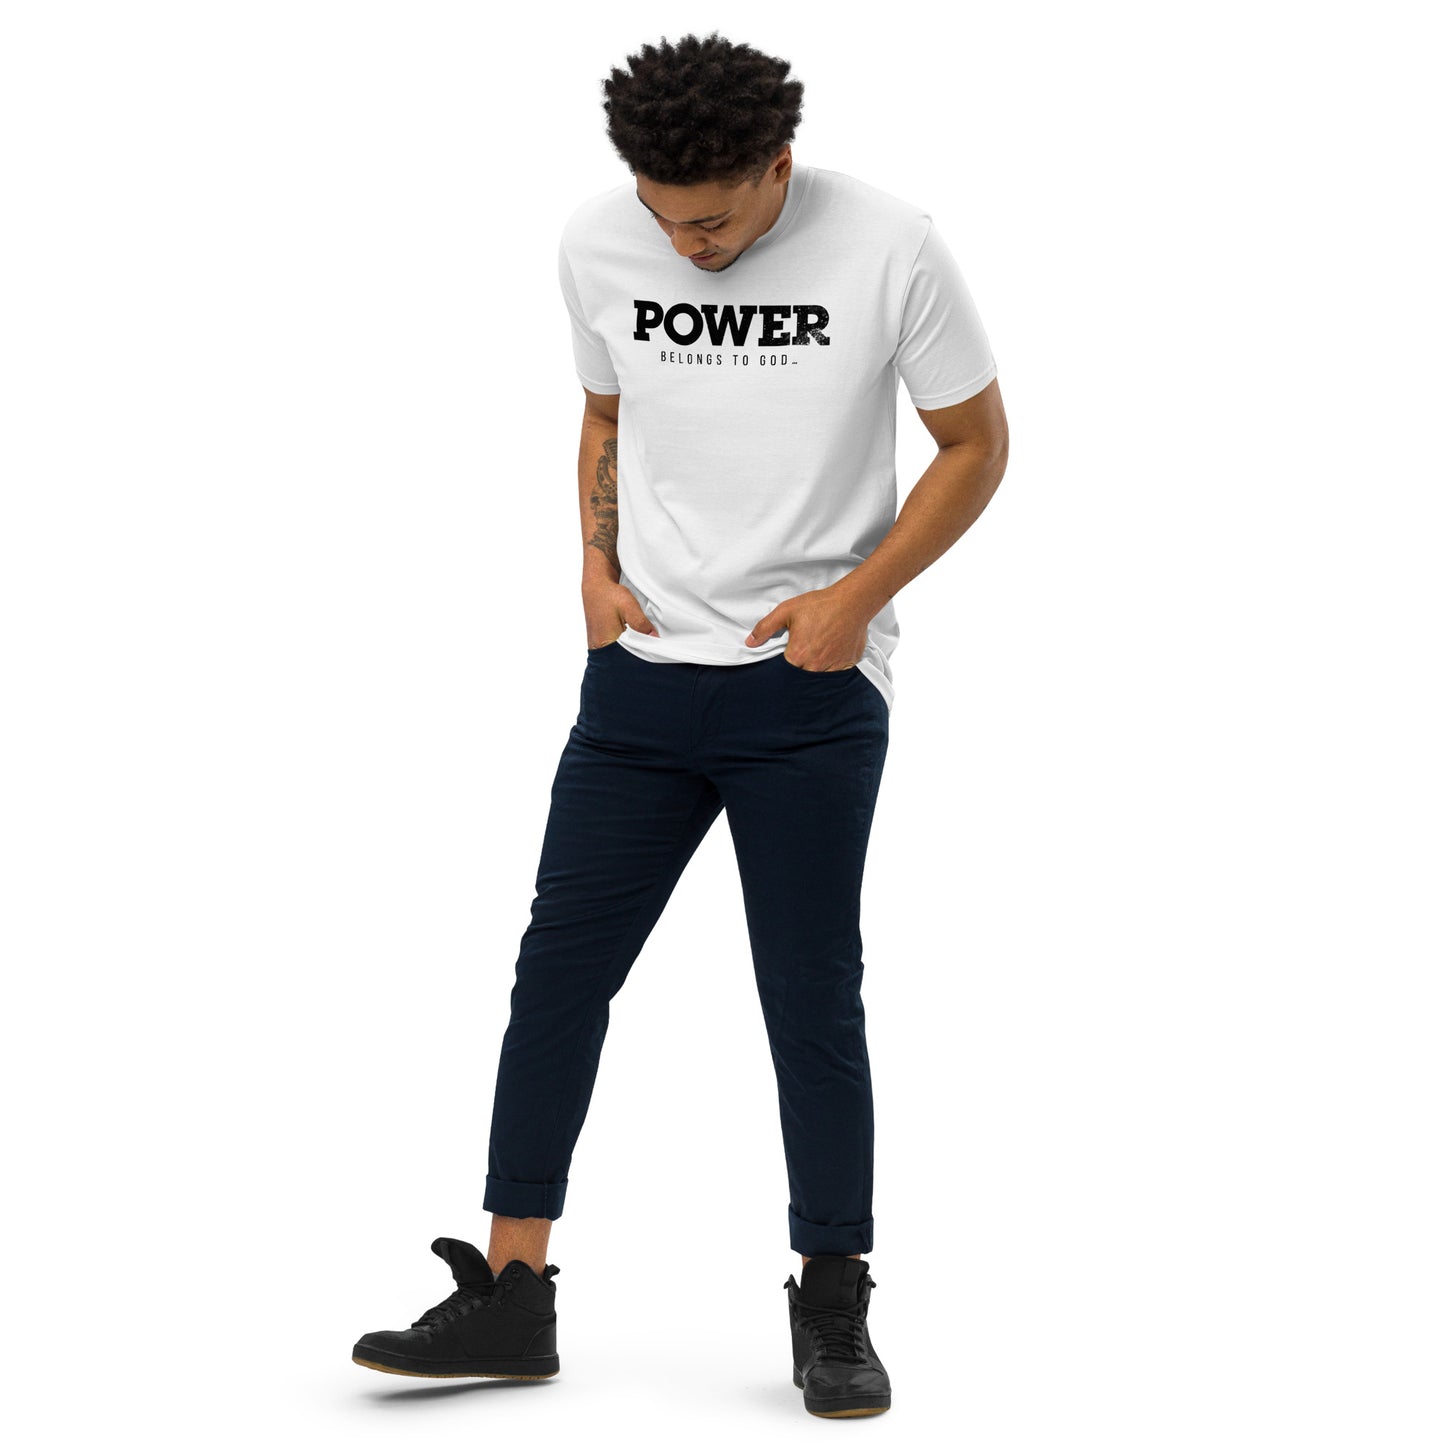 As Seen On TV - Power